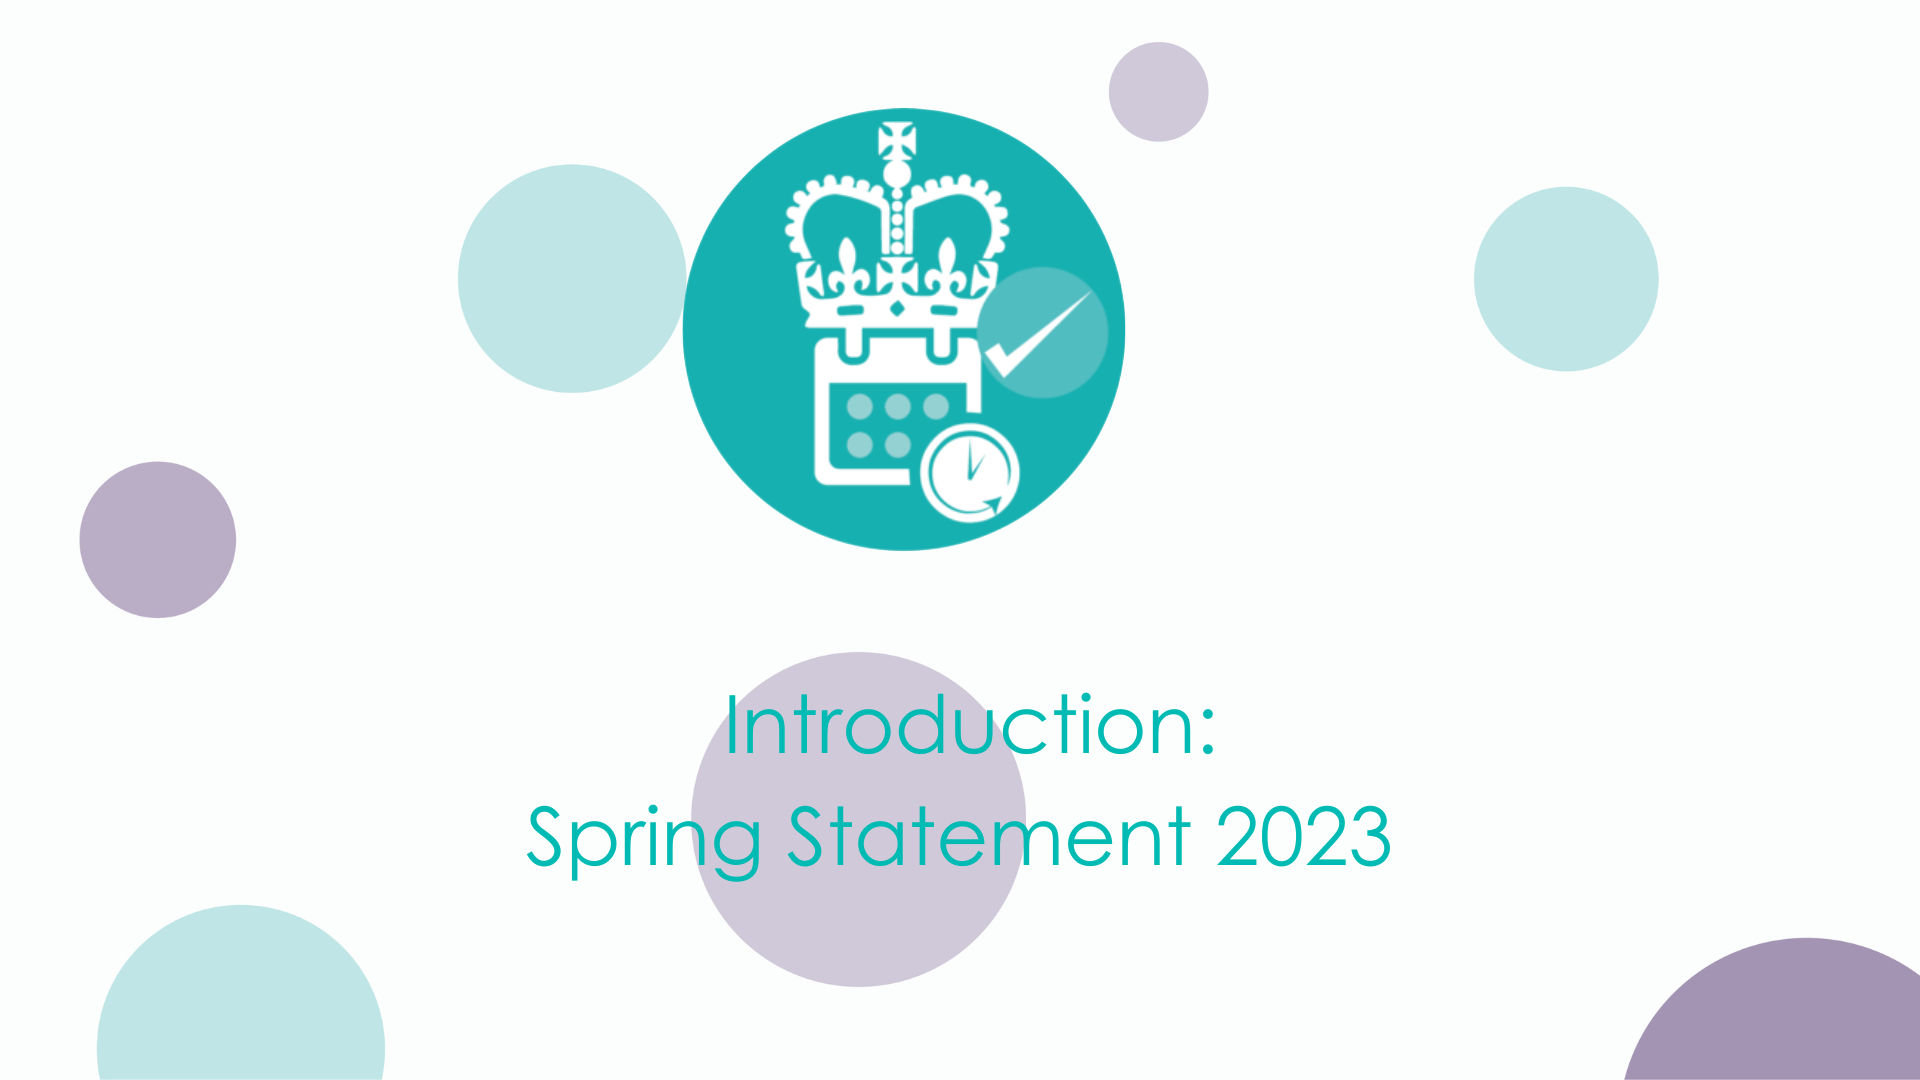 Spring Statement 2023 Introduction